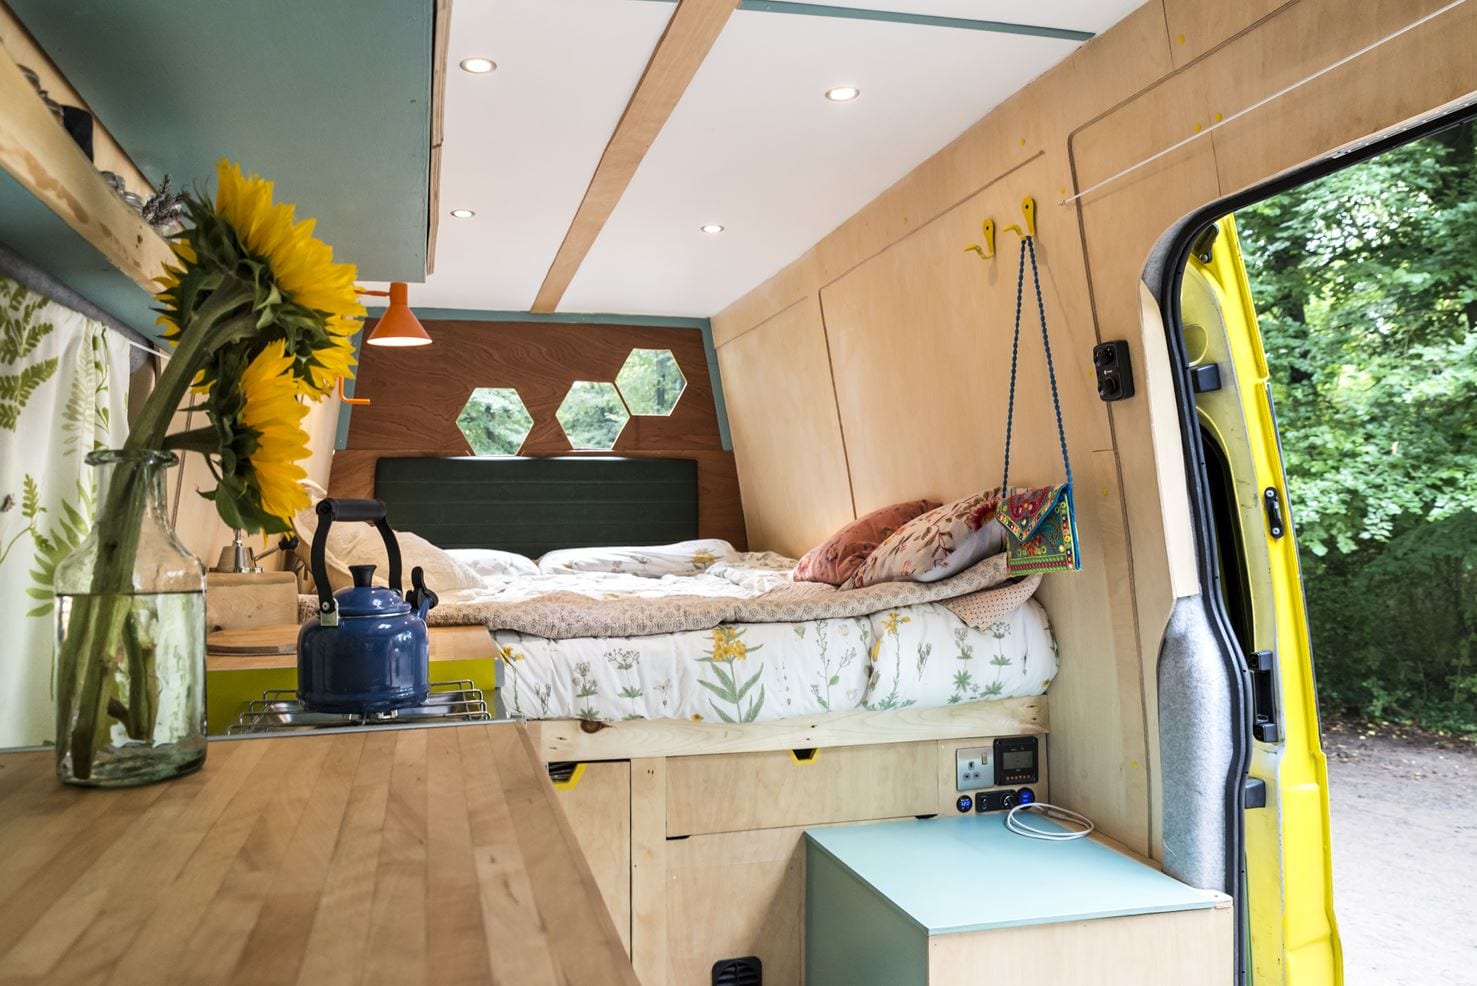 A cozy van interior with wooden walls and ceiling features a neatly made bed with floral bedding and decorative pillows. Hexagonal windows are visible near the head of the bed. Below the bed is storage space. The kitchenette has a wooden countertop, a vase with sunflowers, and a blue kettle.